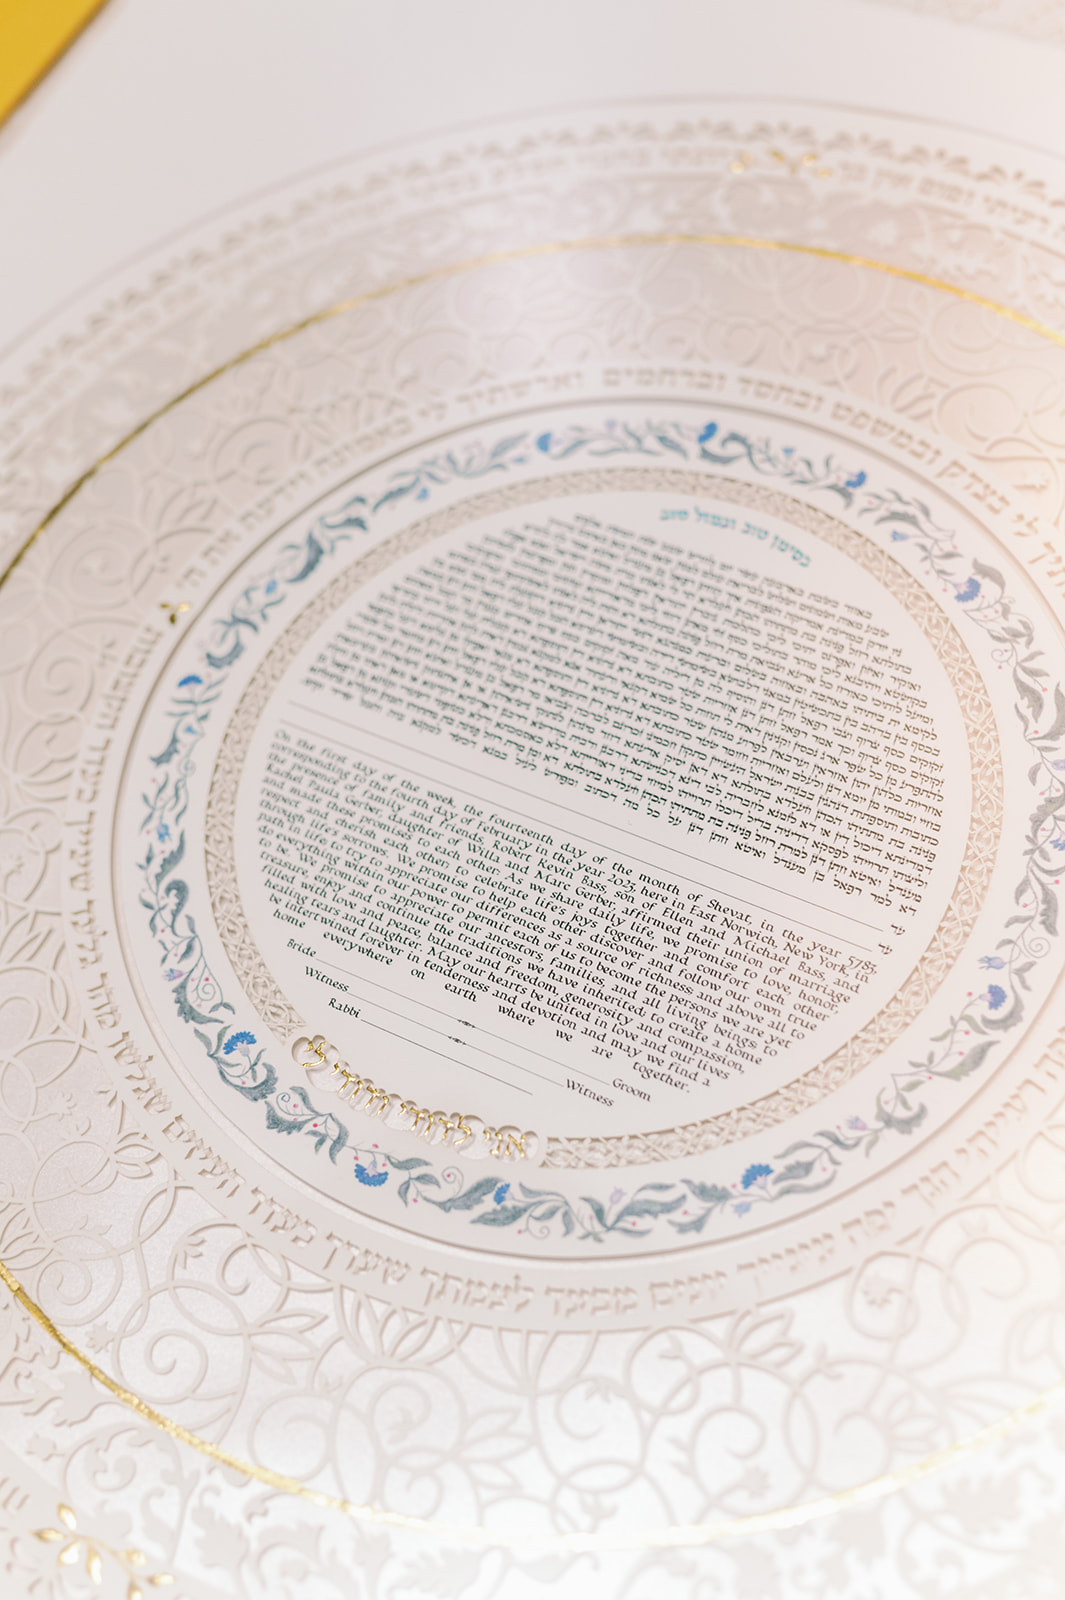 Aesthetic Ketubah marriage contract.